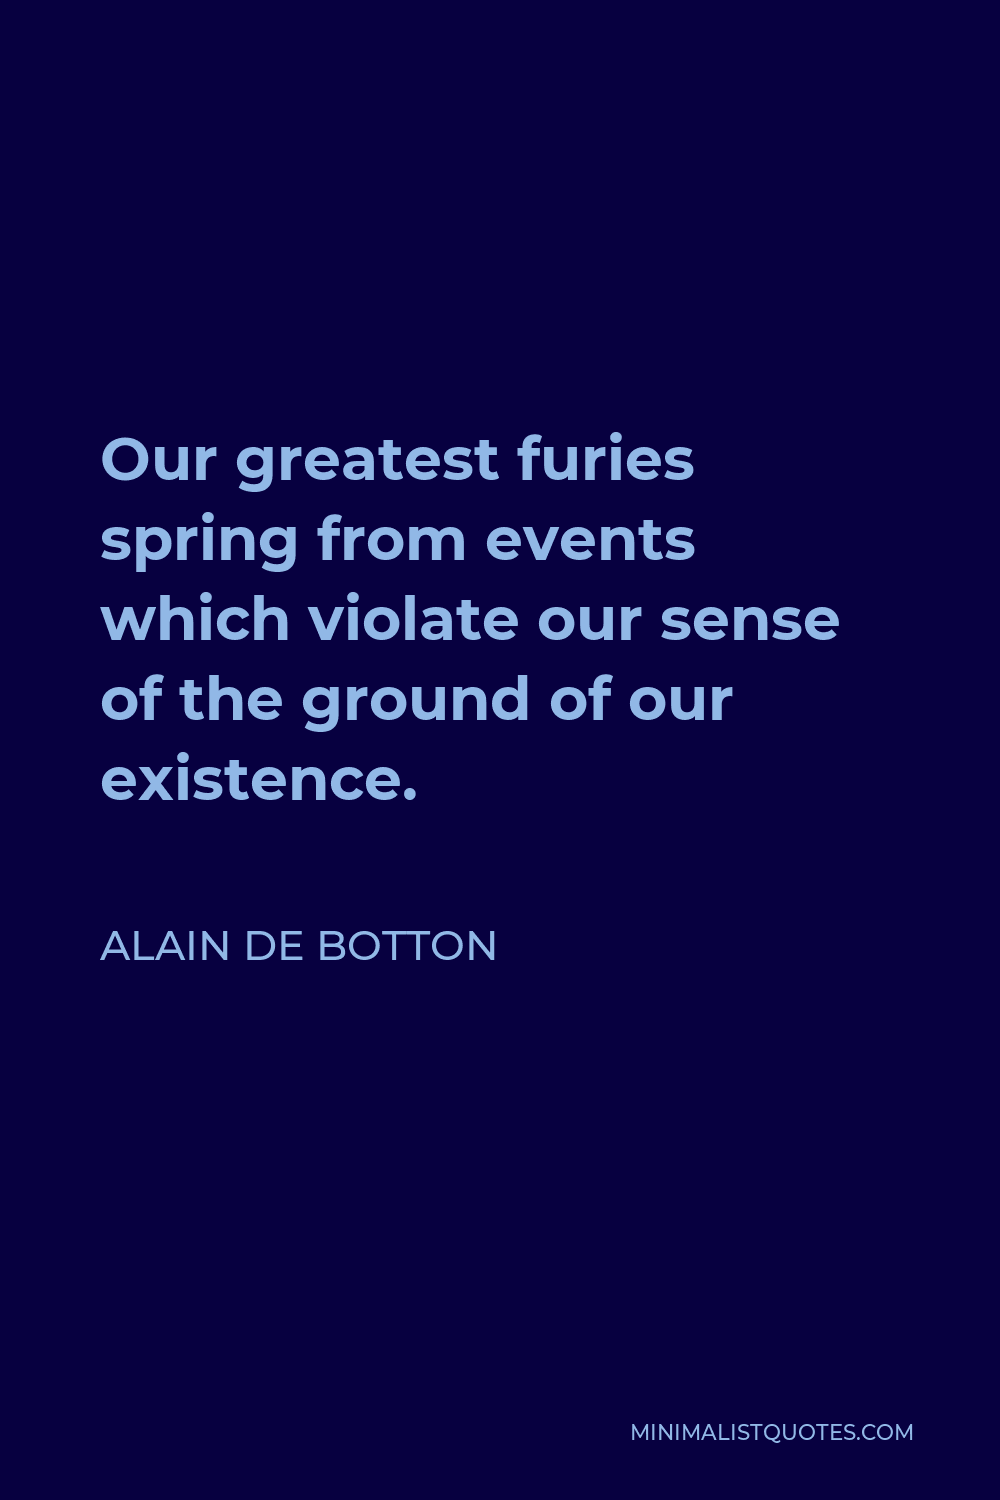 Alain de Botton Quote - Our greatest furies spring from events which violate our sense of the ground of our existence.